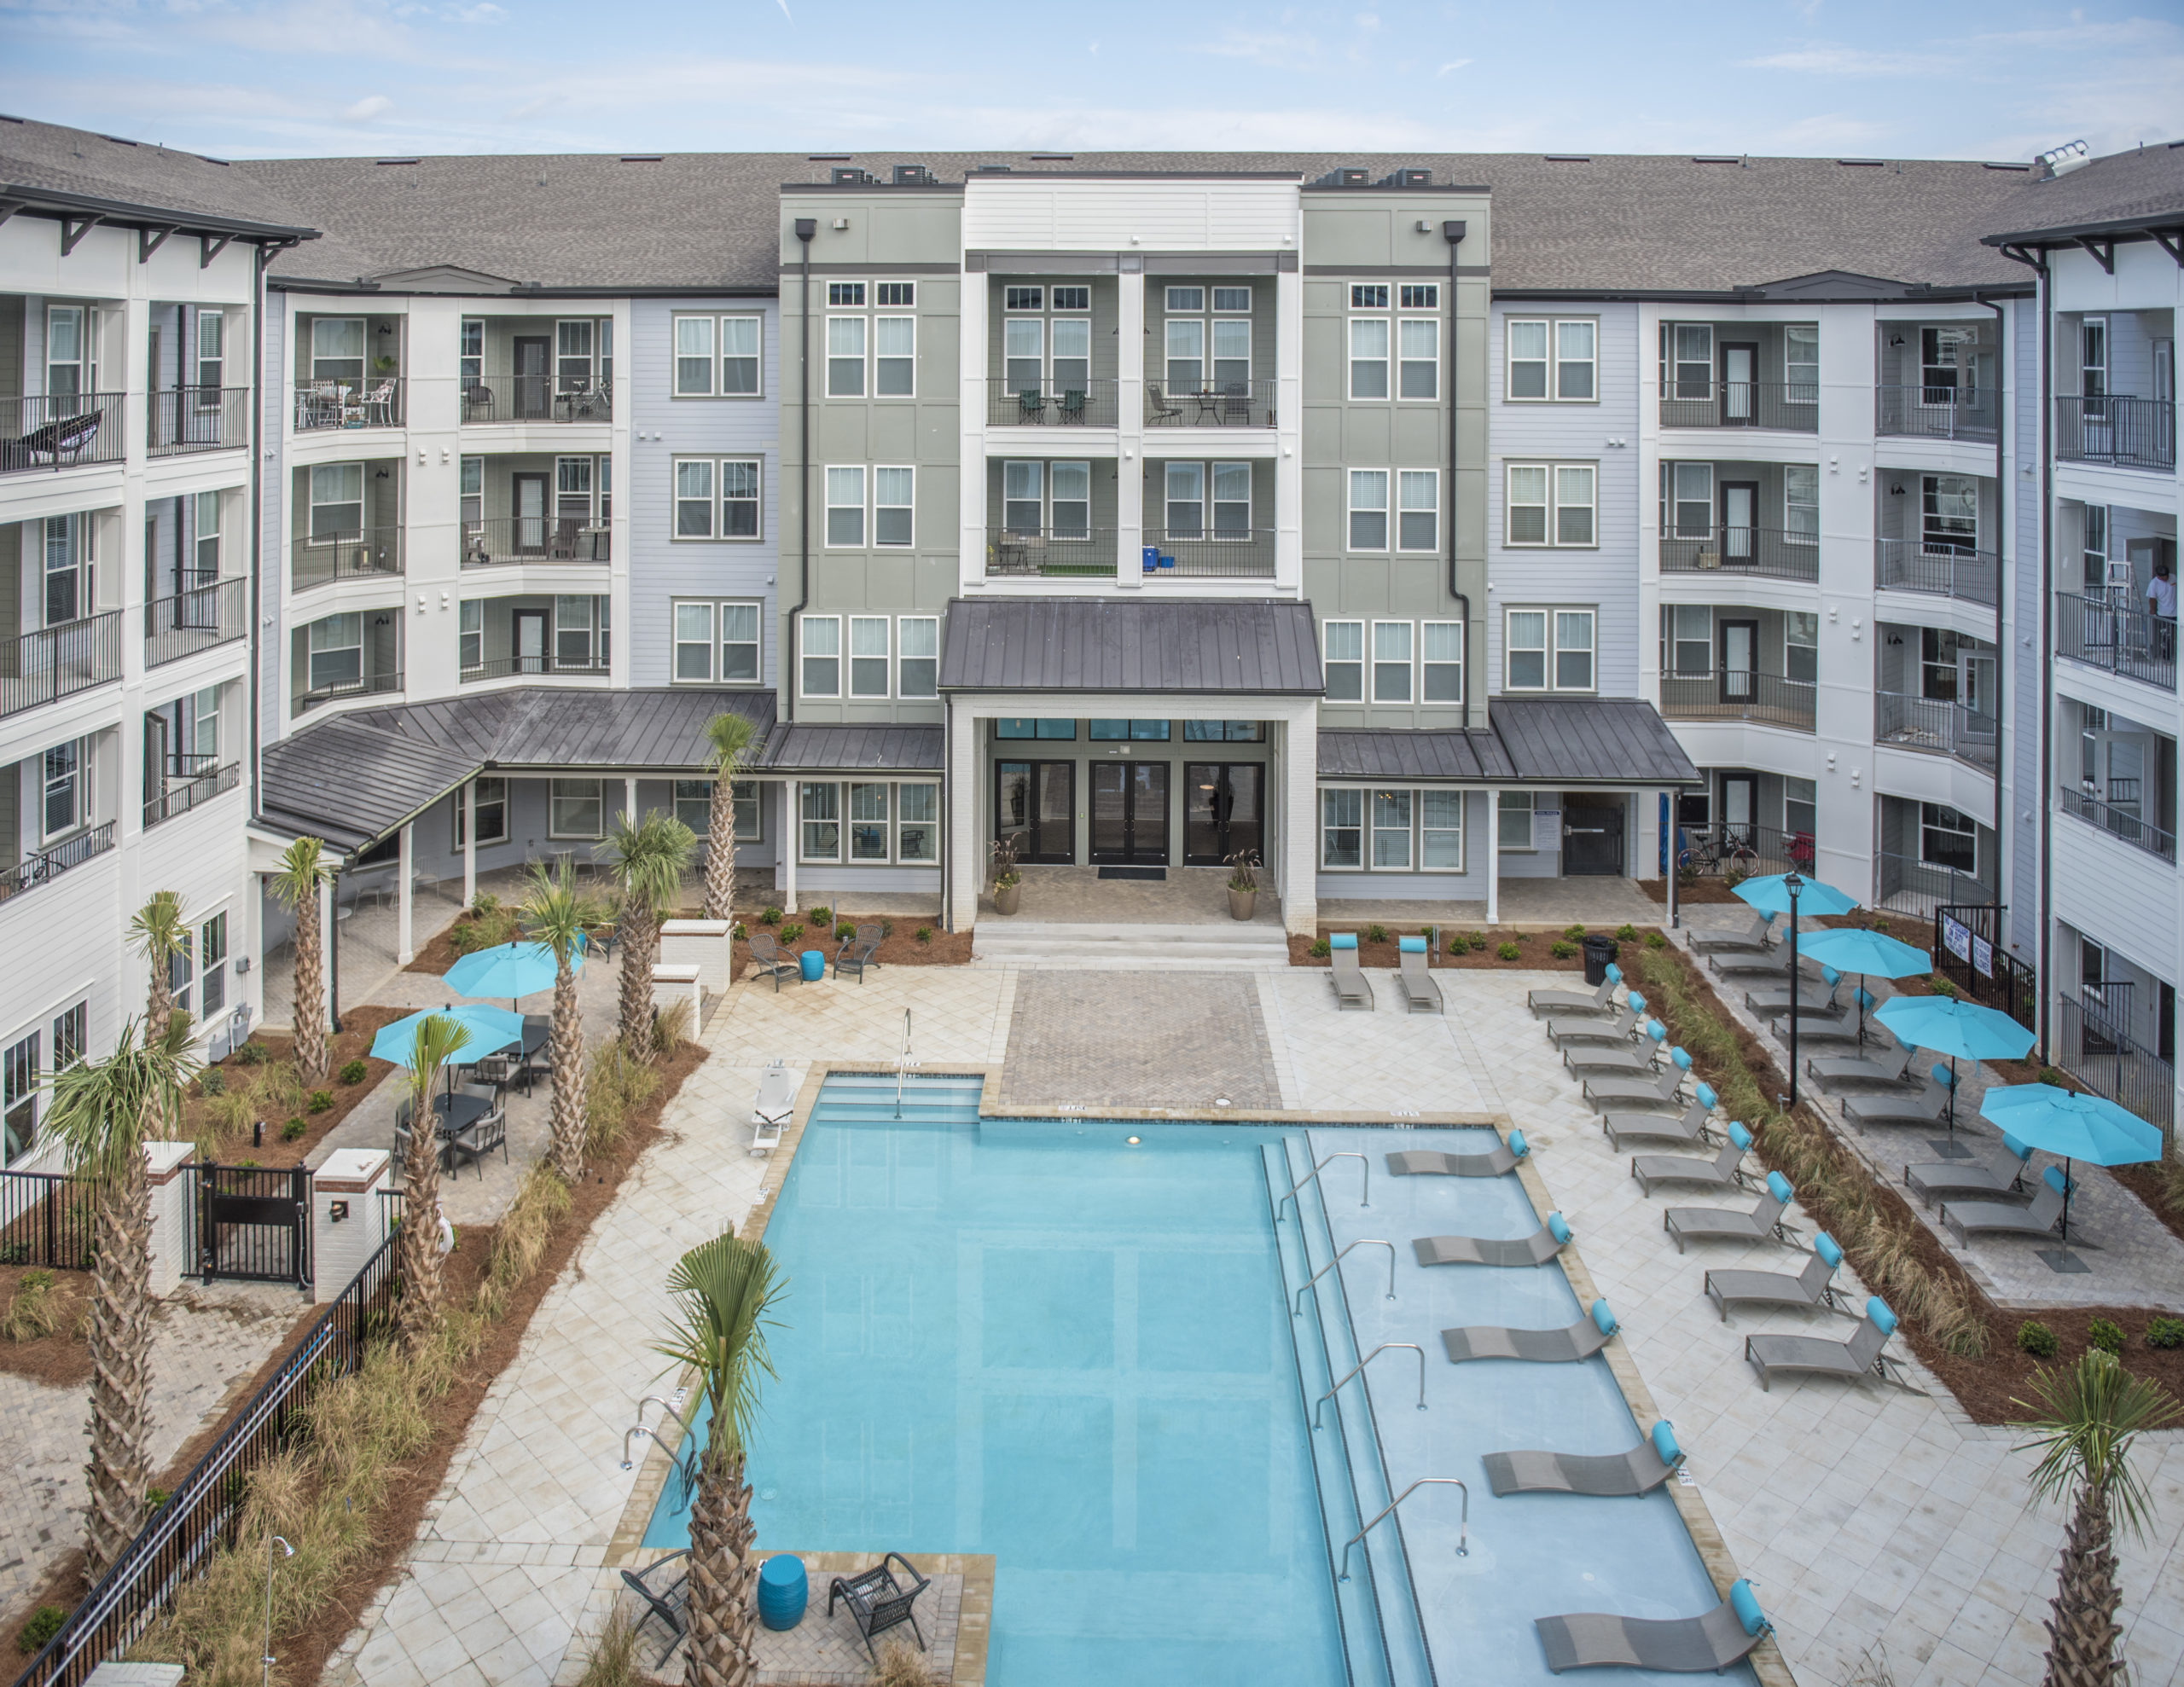 Ironwood – North Augusta, SC - Pool and Buildings